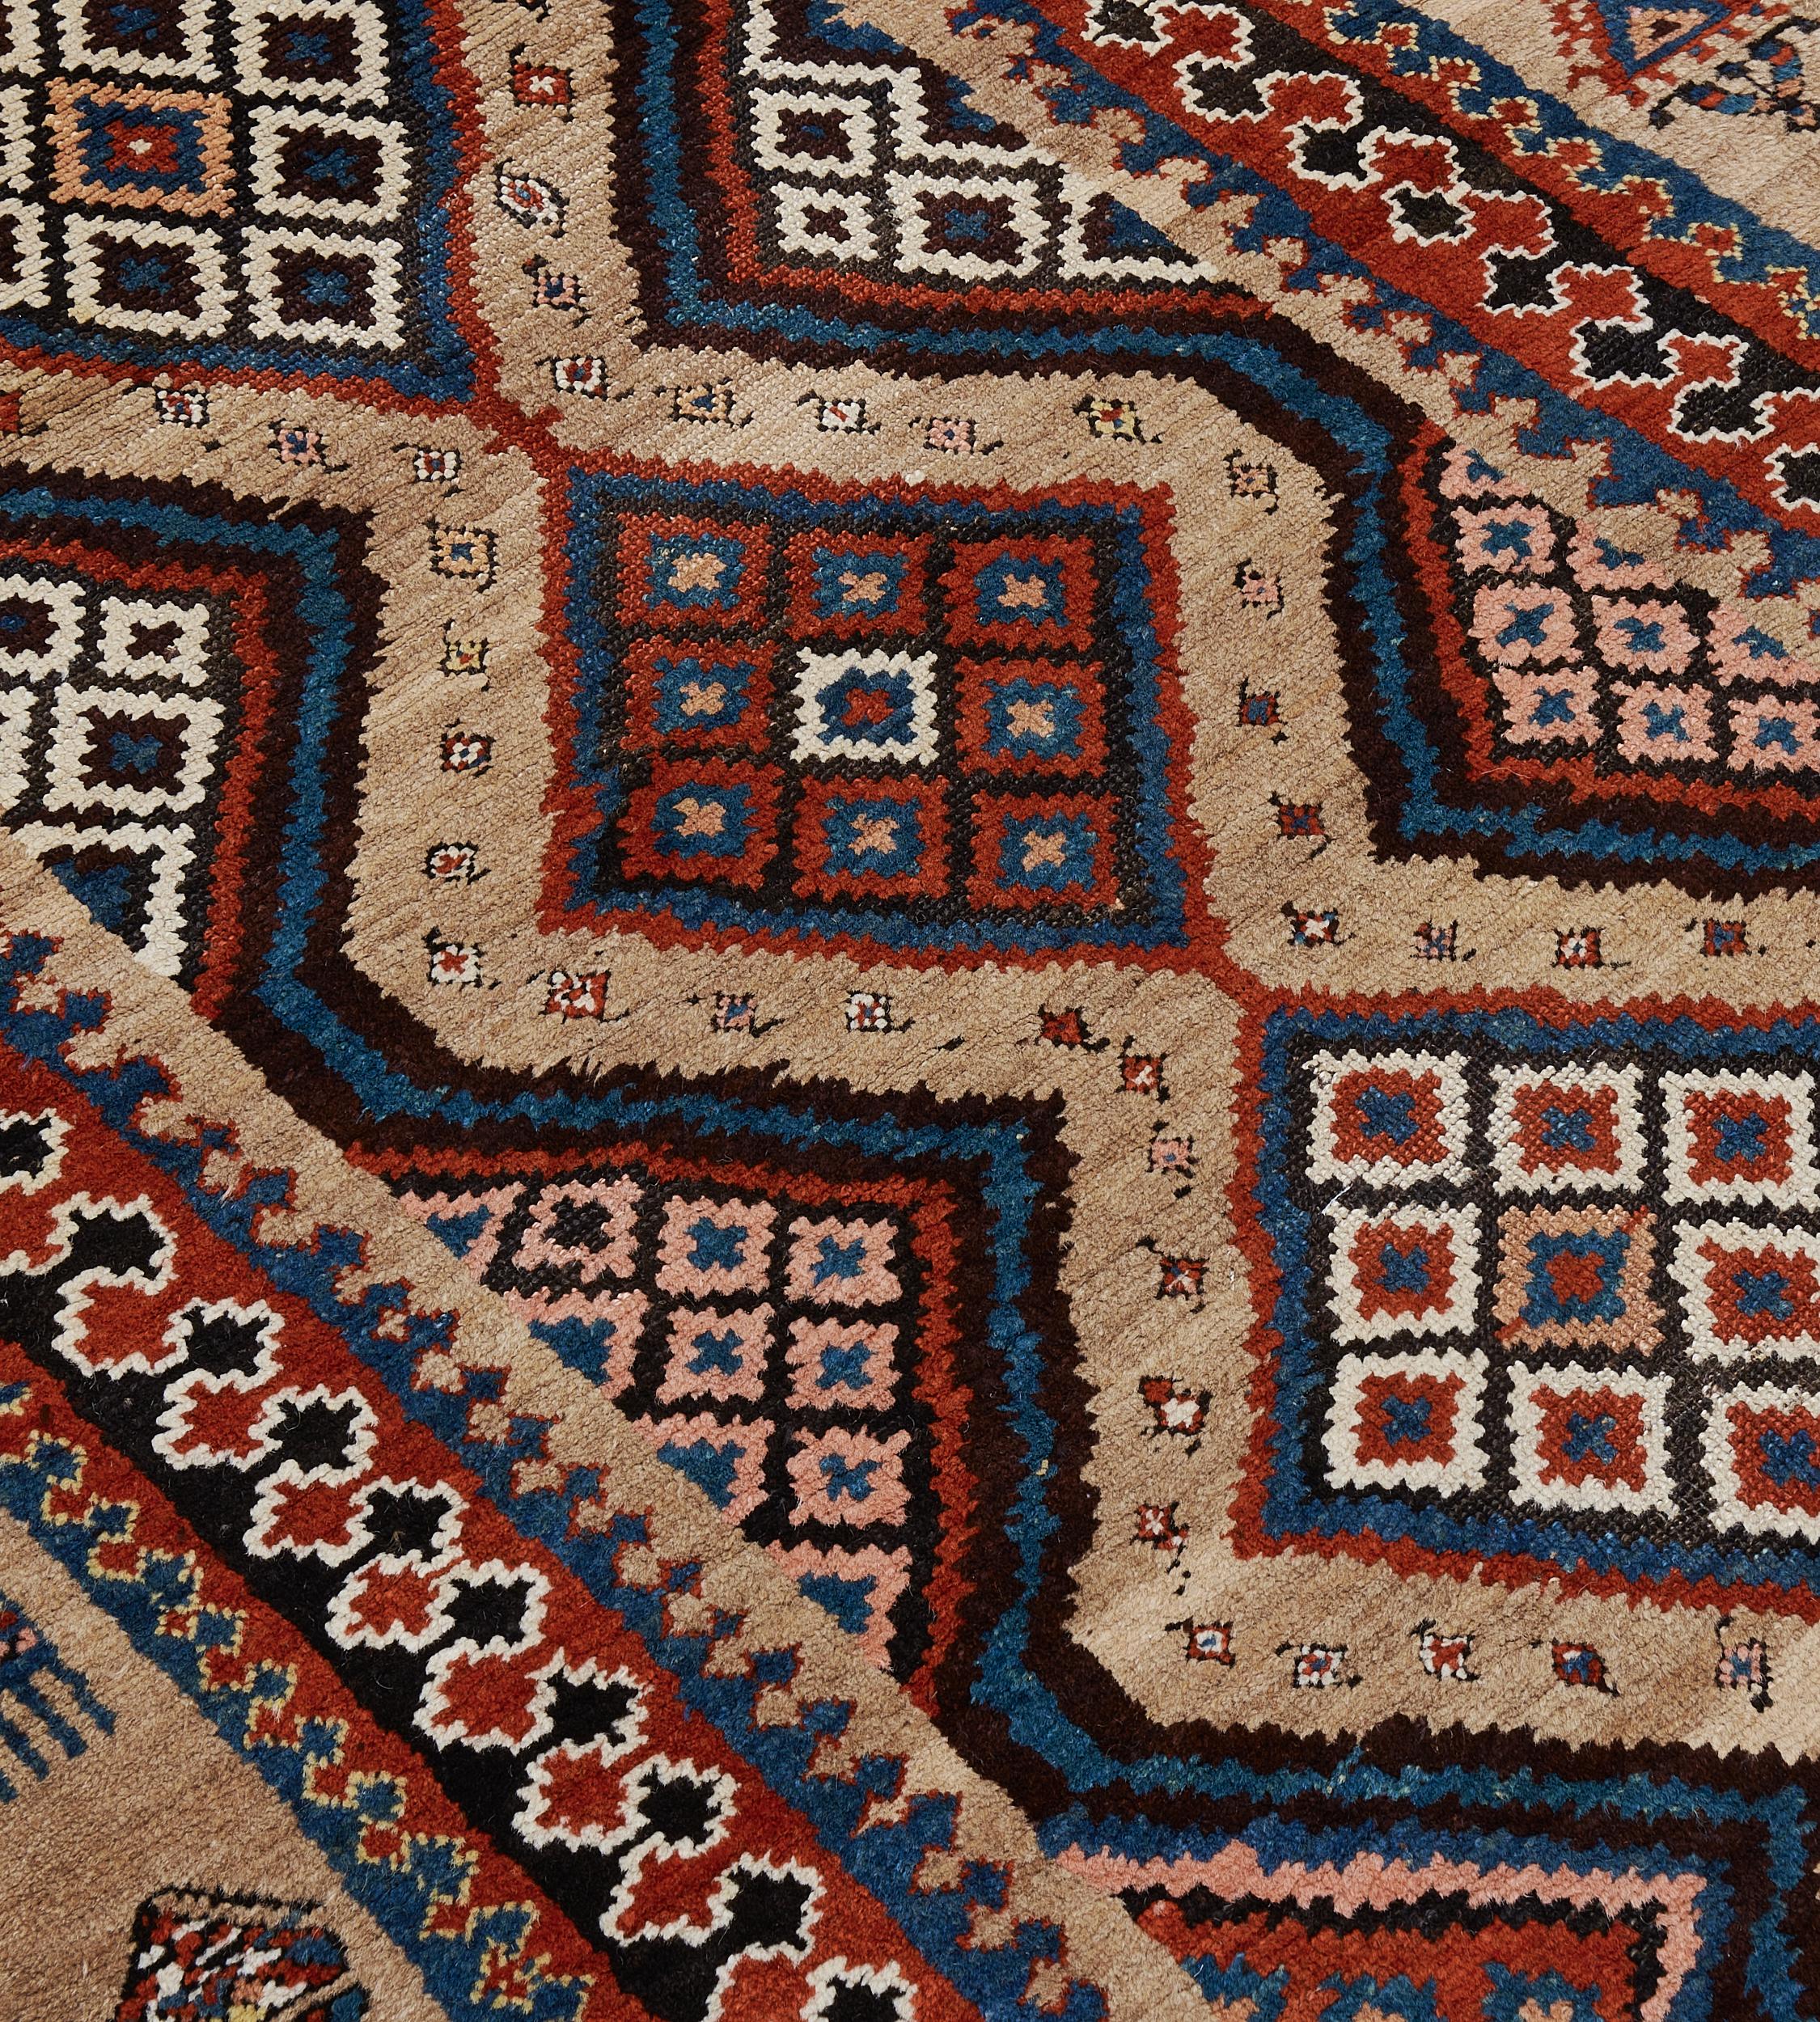 This traditional hand-woven Persian serab rug has a shaded light tobacco field sprinkled with lozenges and a single row of polychrome lozenges enclosing further geometry, with similar spandrels, in delicate rust and blue-green triplet skittle